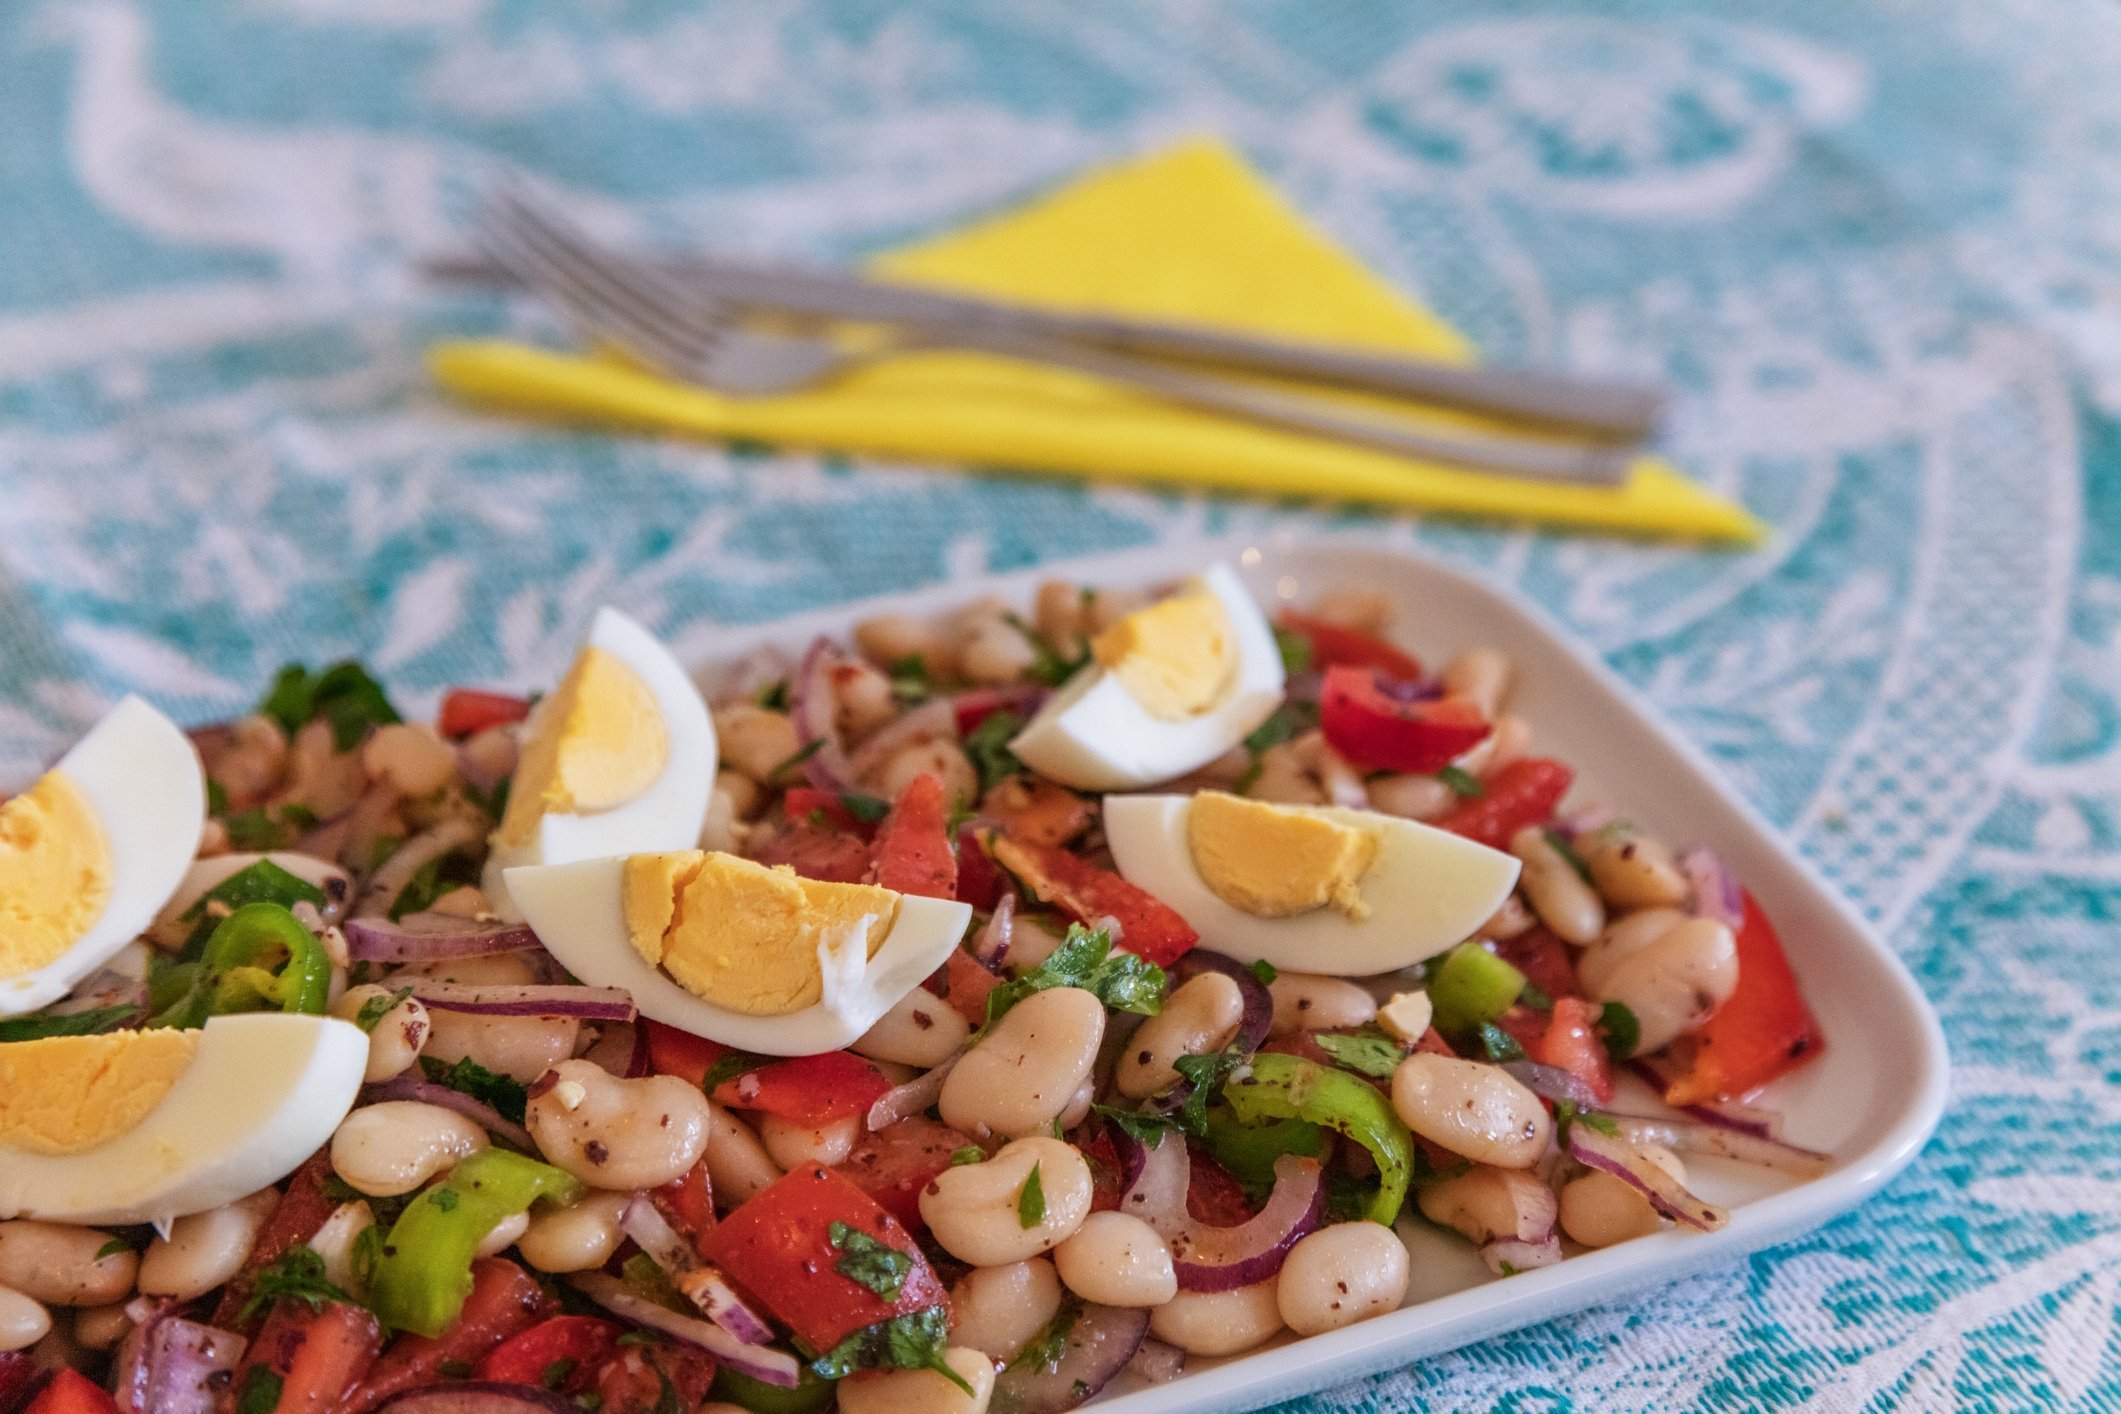 The Antalya way of doing the traditional Turkish bean salad piyaz includes eggs and tahini. (iStock Photo)